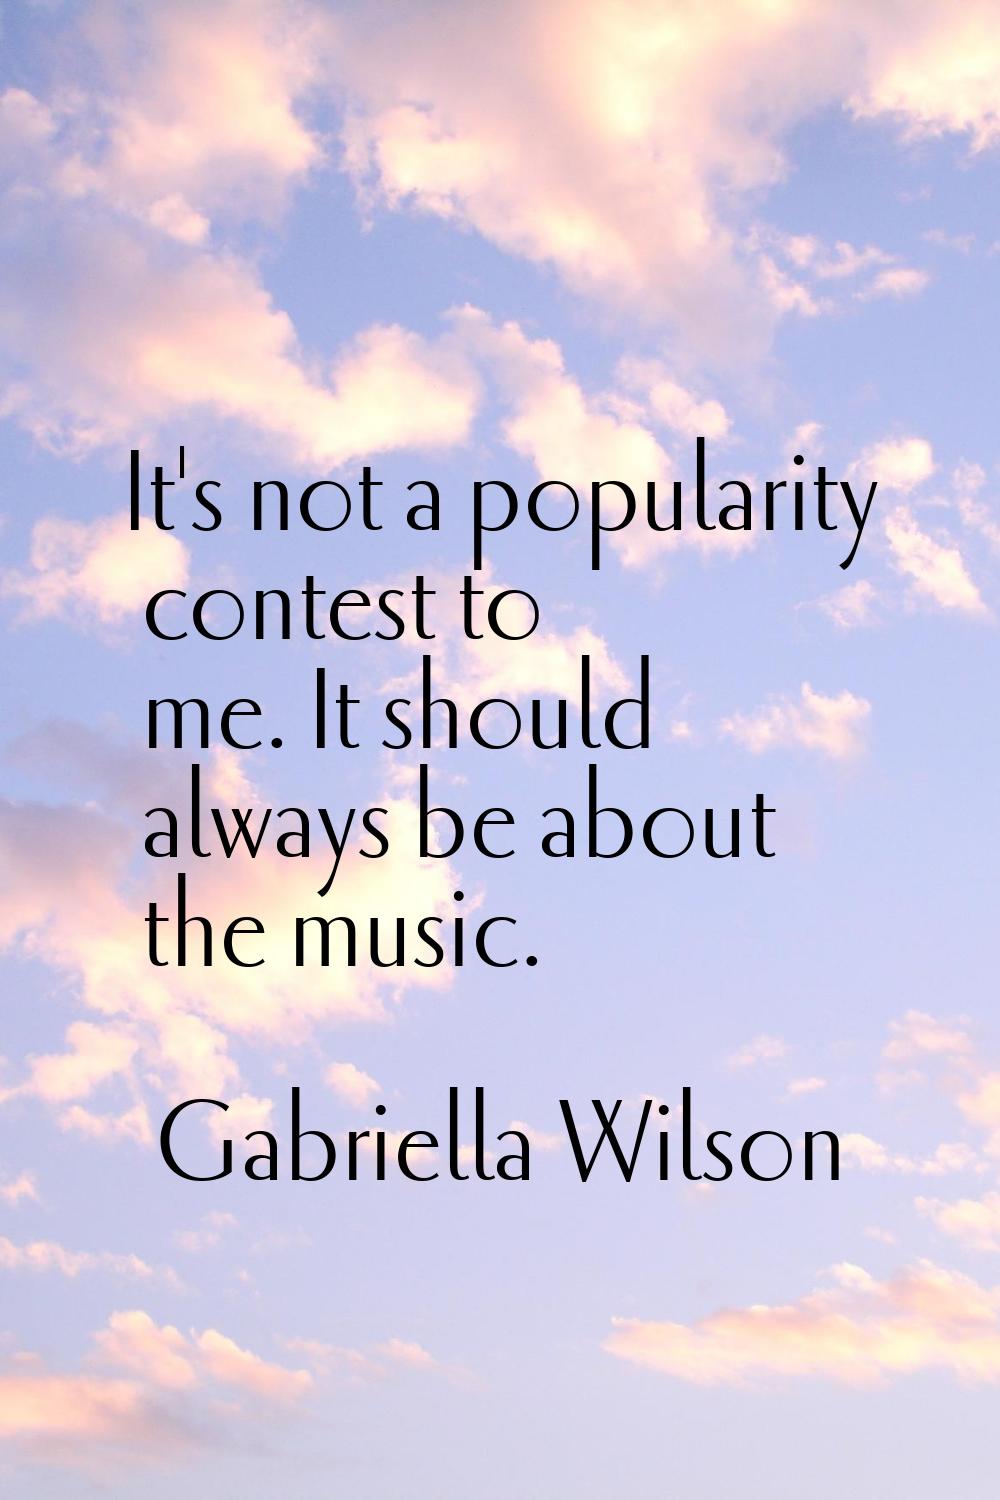 It's not a popularity contest to me. It should always be about the music.